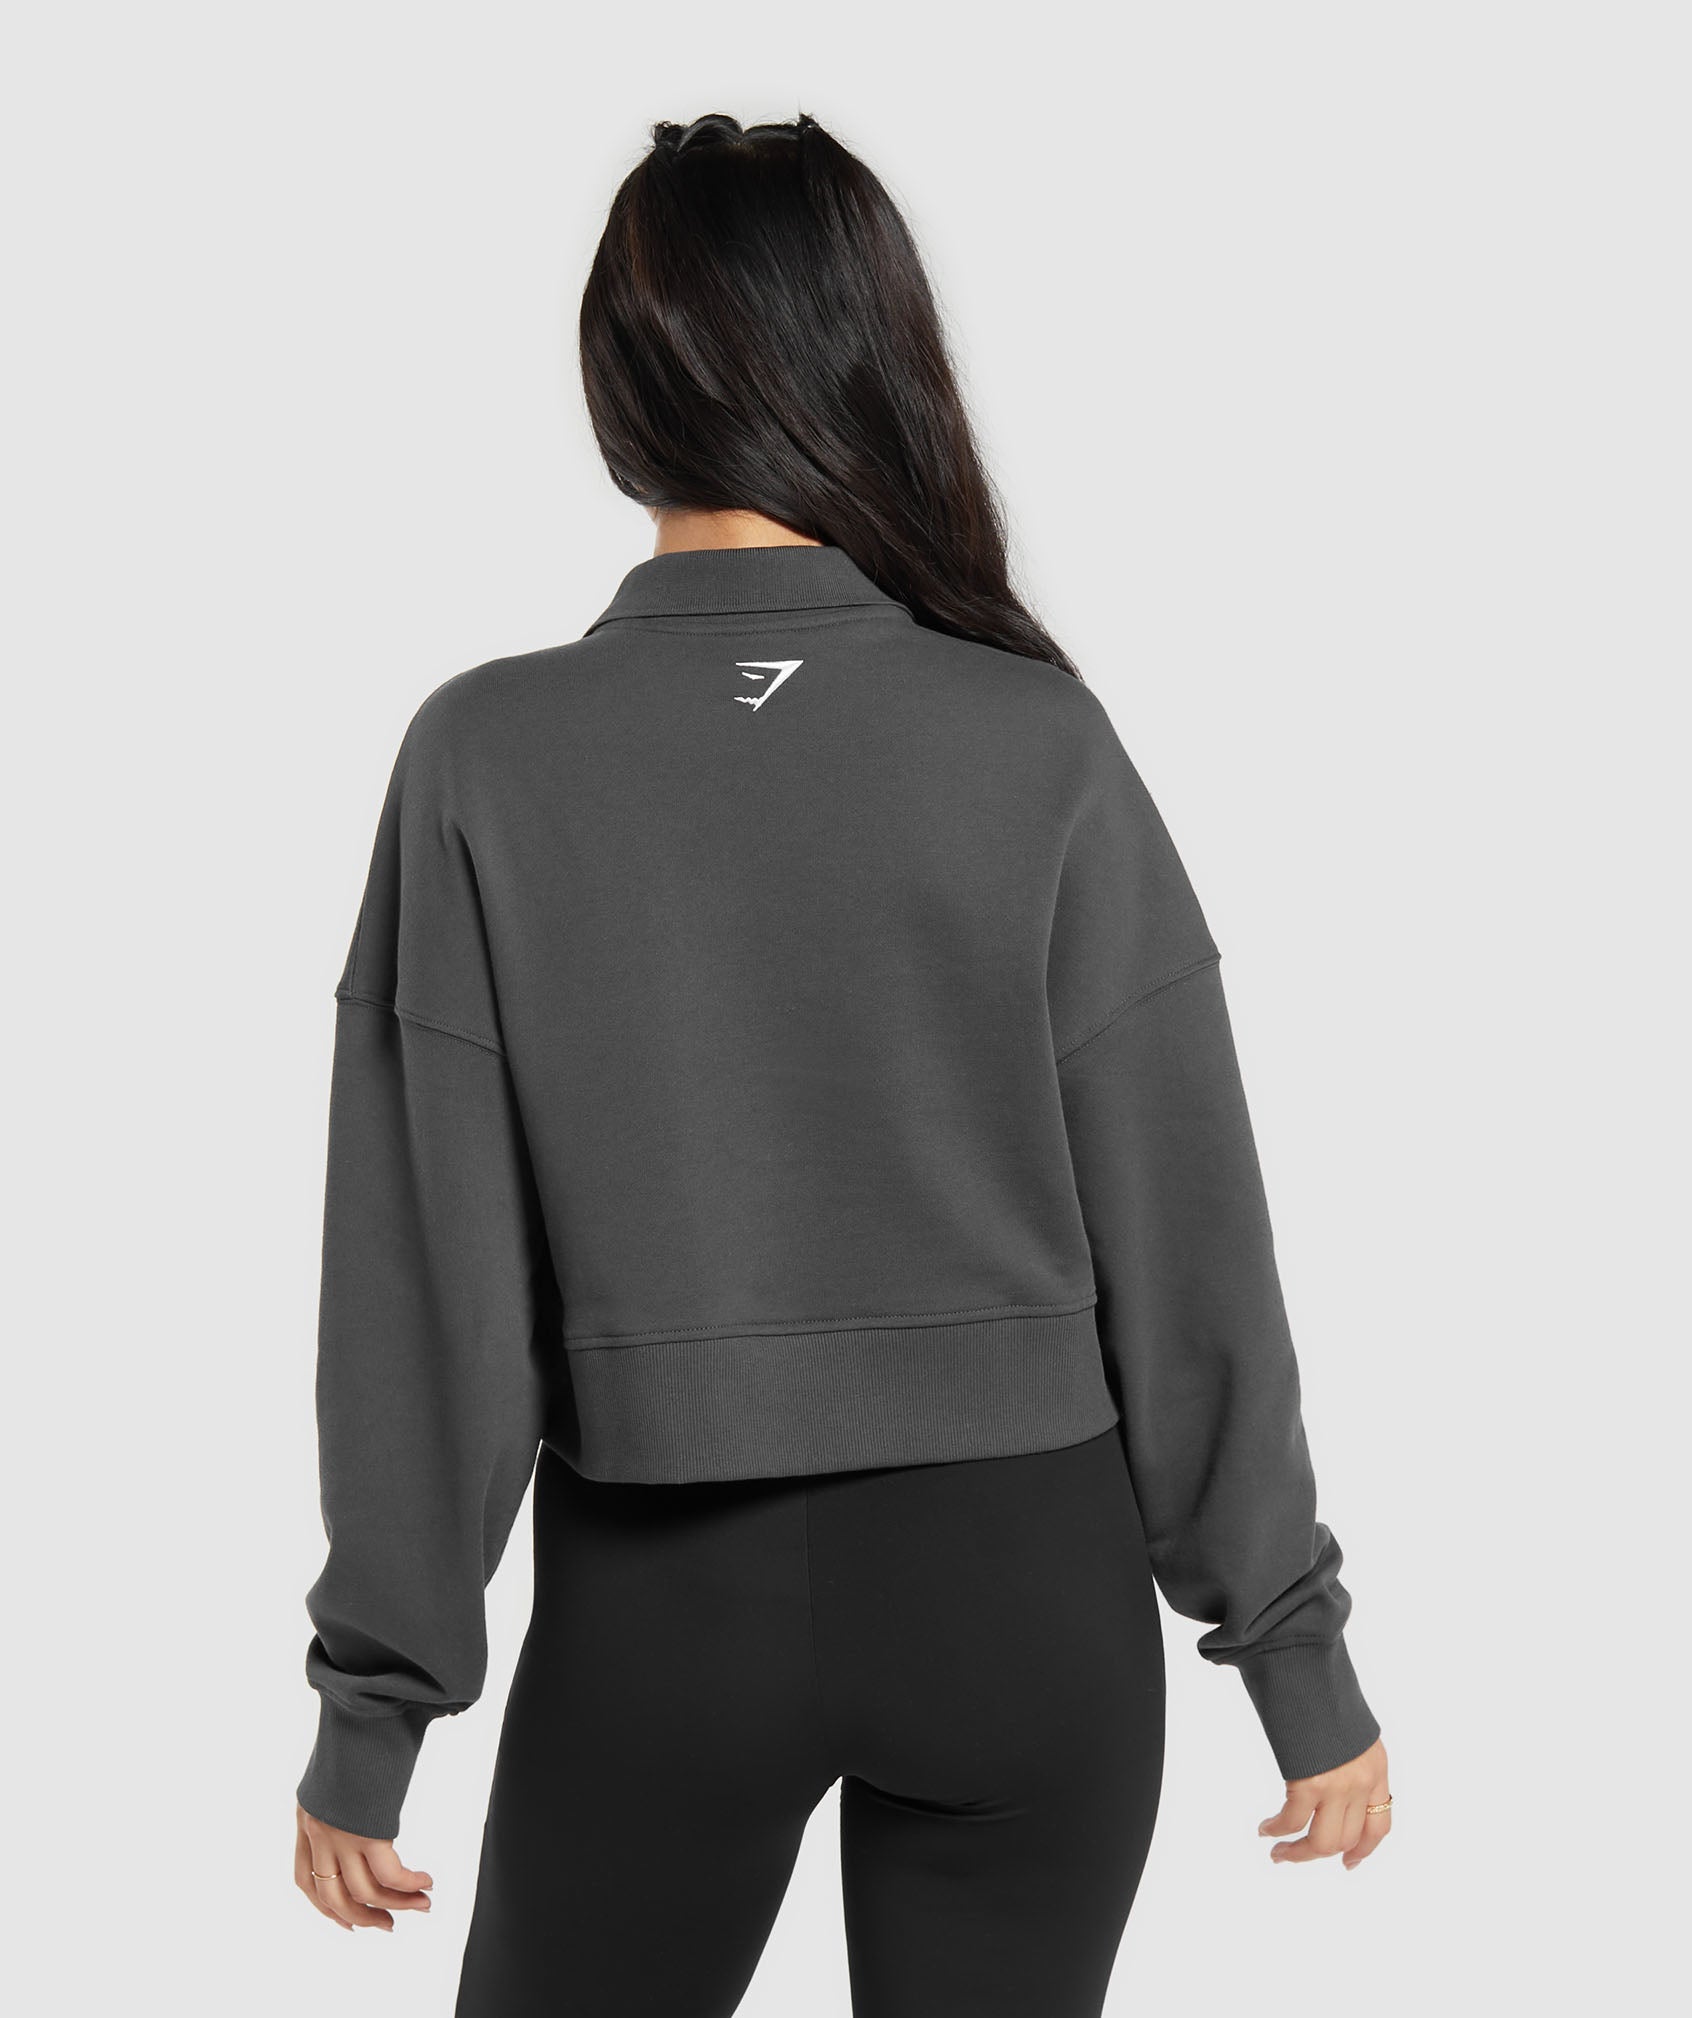 Outline Graphic Oversized 1/4 Zip Pullover